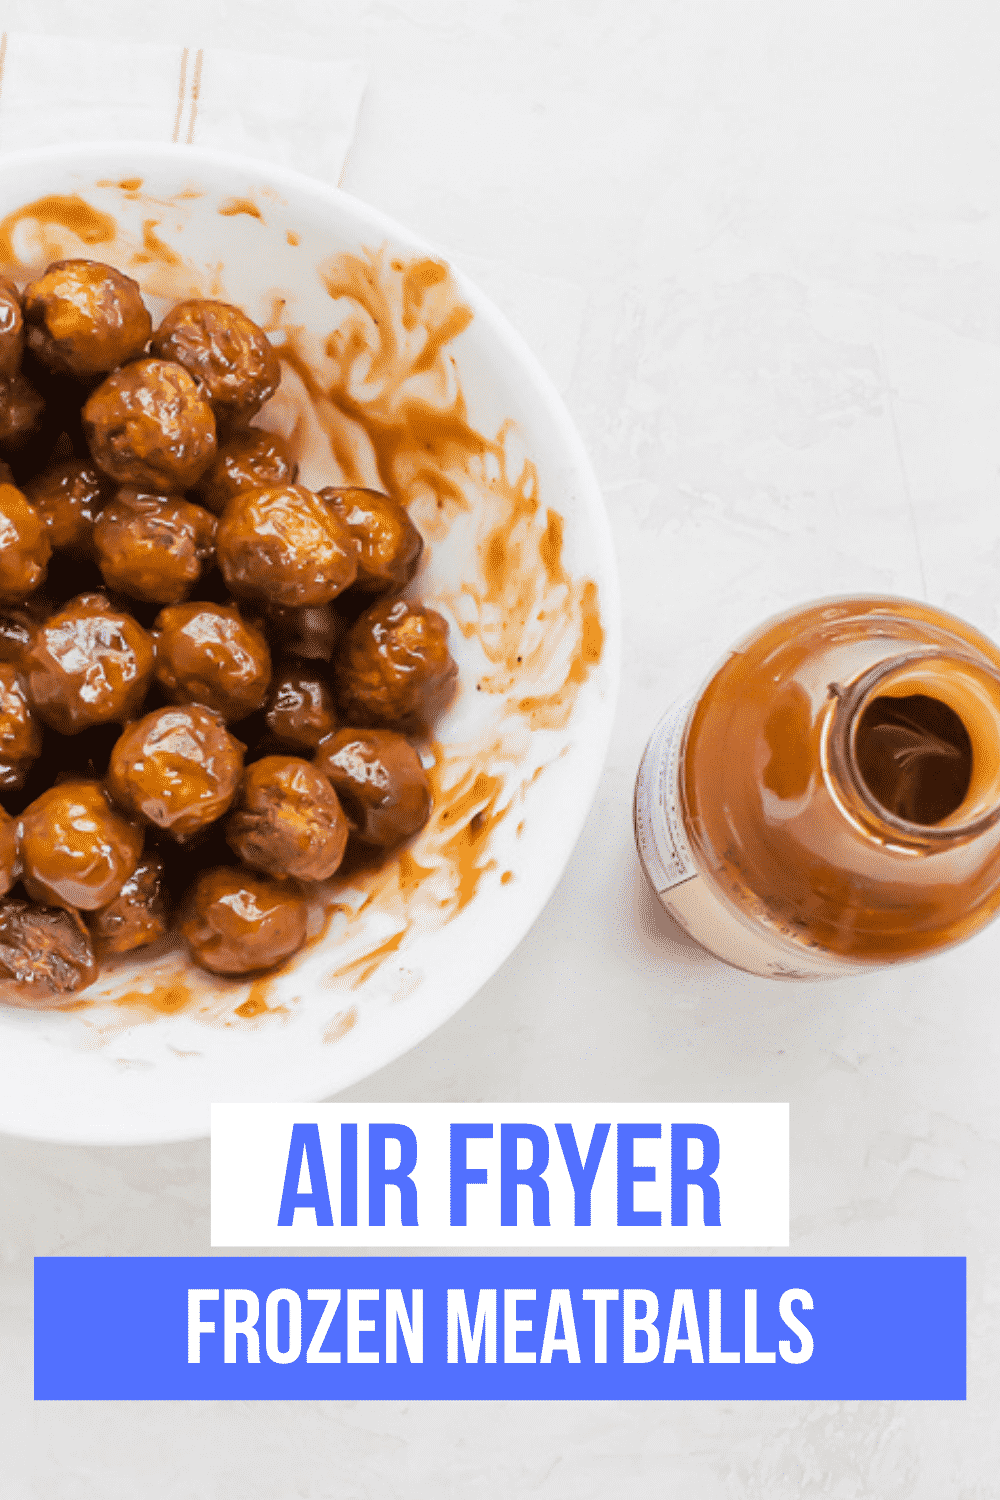 Are you ready for a simple and quick meatball appetizer made in the air fryer? Air Fryer Frozen Meatballs with BBQ glaze is the recipe you've been looking for. #airfryer #appetizers via @vegetarianmamma